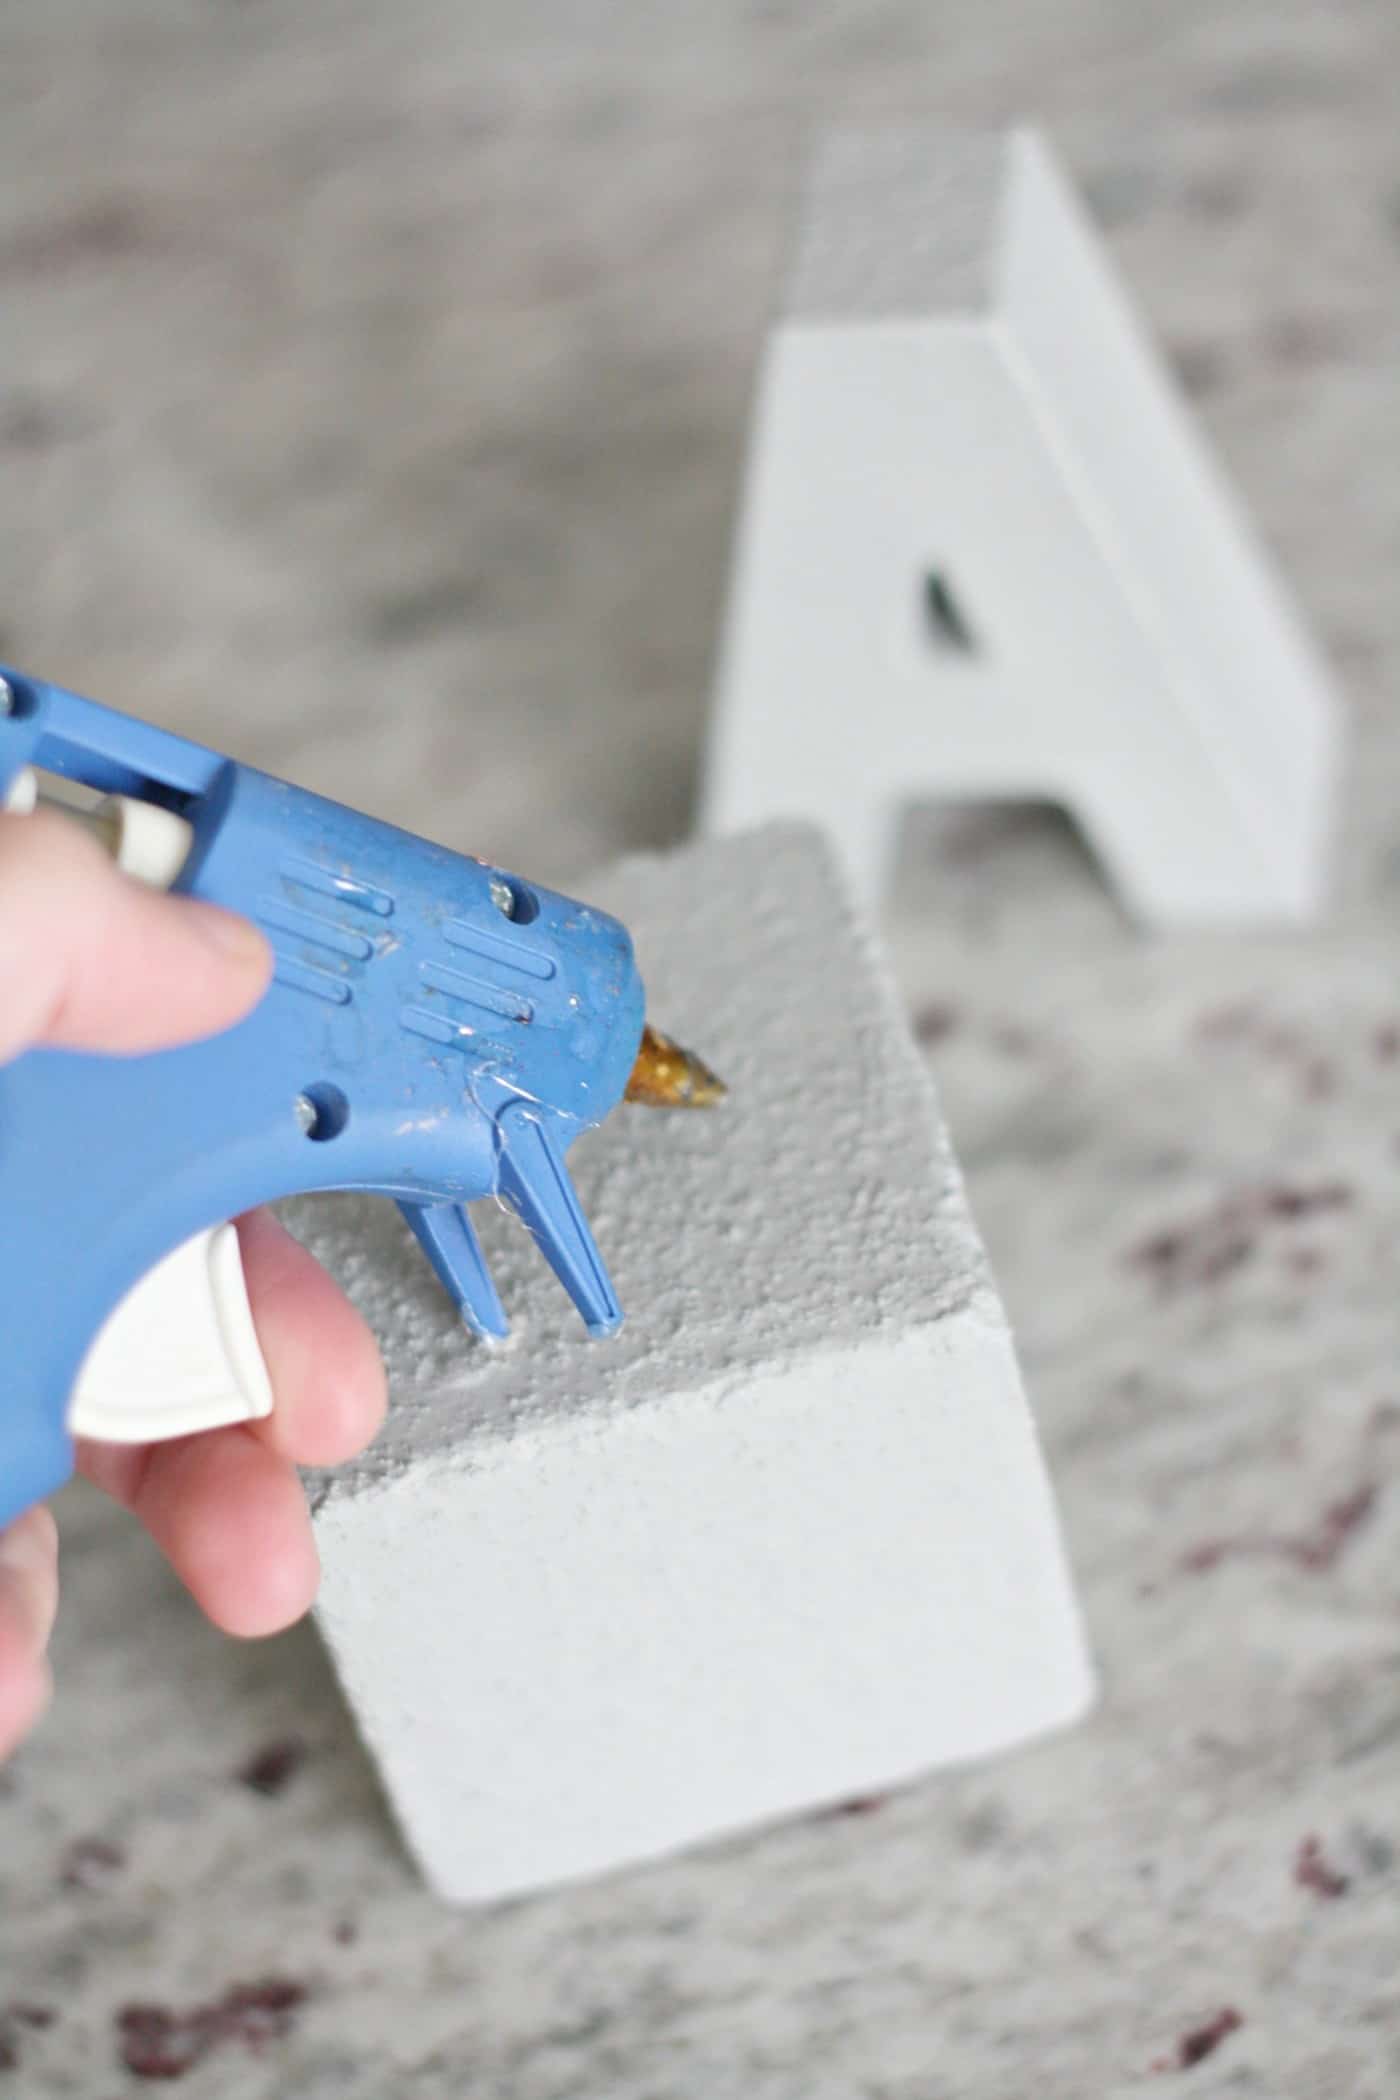 Gluing the letter to the cube using a hot glue gun